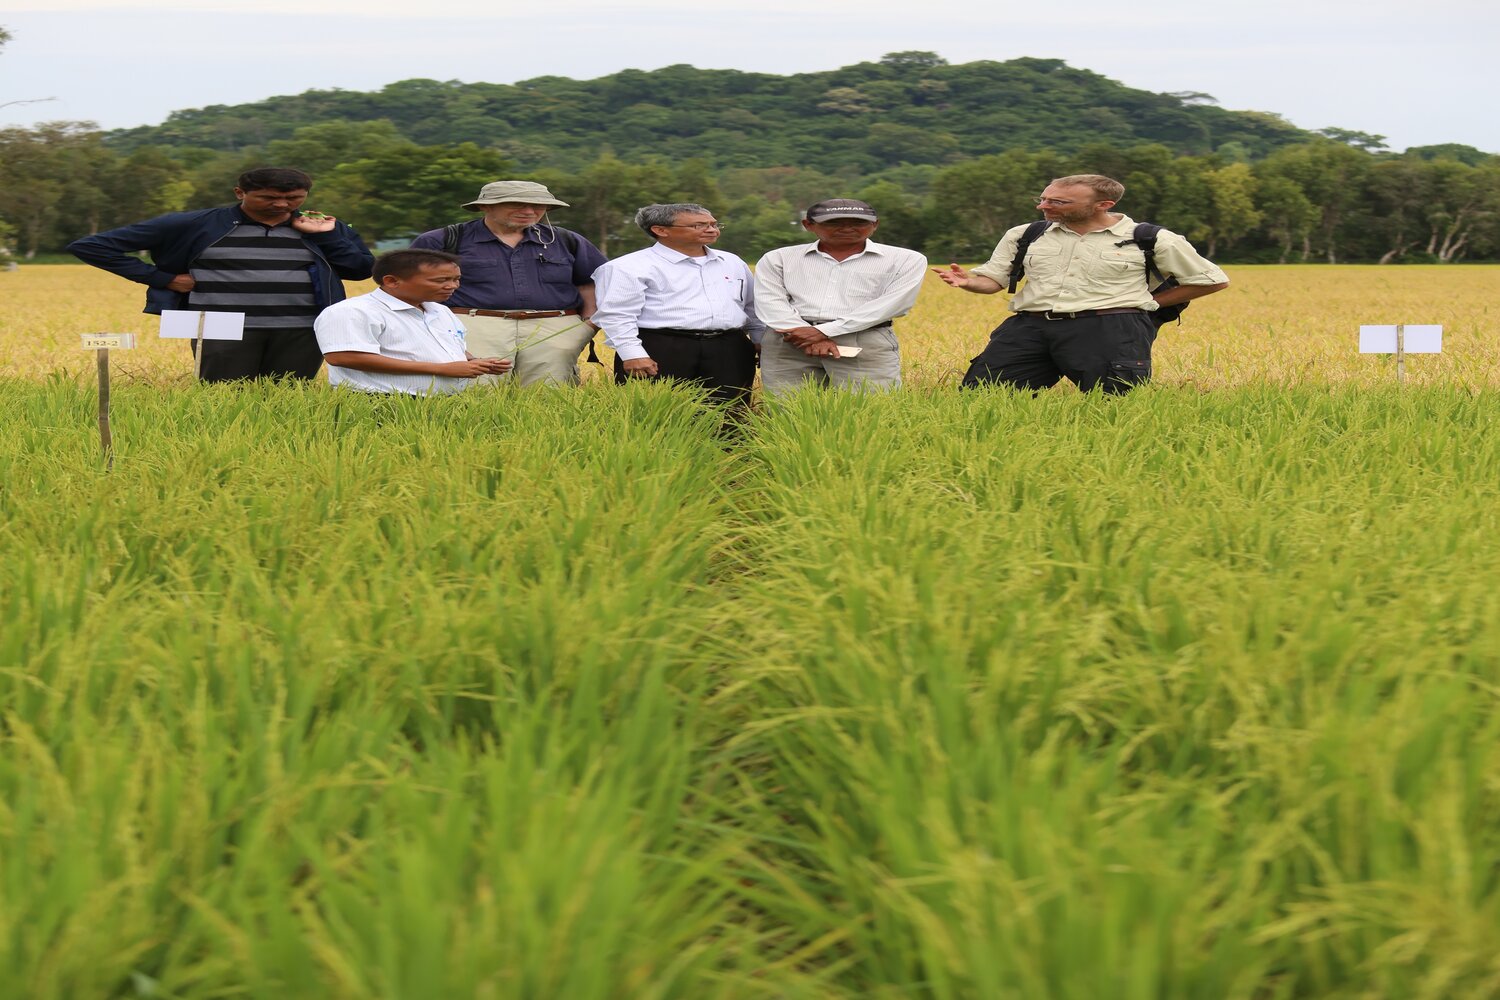 Left to Right: Venu Ramaiah, IRRI; Professor NH Tin from the Mekong Delta Development Research Institute; Åsmund Bjornstad, NMBU; Professor HQ Tin from the Mekong Delta Development Research Institute; farmer-breeder Mr. Tran Thanh Hung; and Ben Kilian, Global Crop Diversity Trust, examine the Nui Voi Seed Club’s on-farm trials in the An Giang province, where farmers have selected the most promising lines of their first harvest, based on heat-resistance, number of panicles, resistance to blast disease and short-cycle duration. Photo: L.M. Salazar